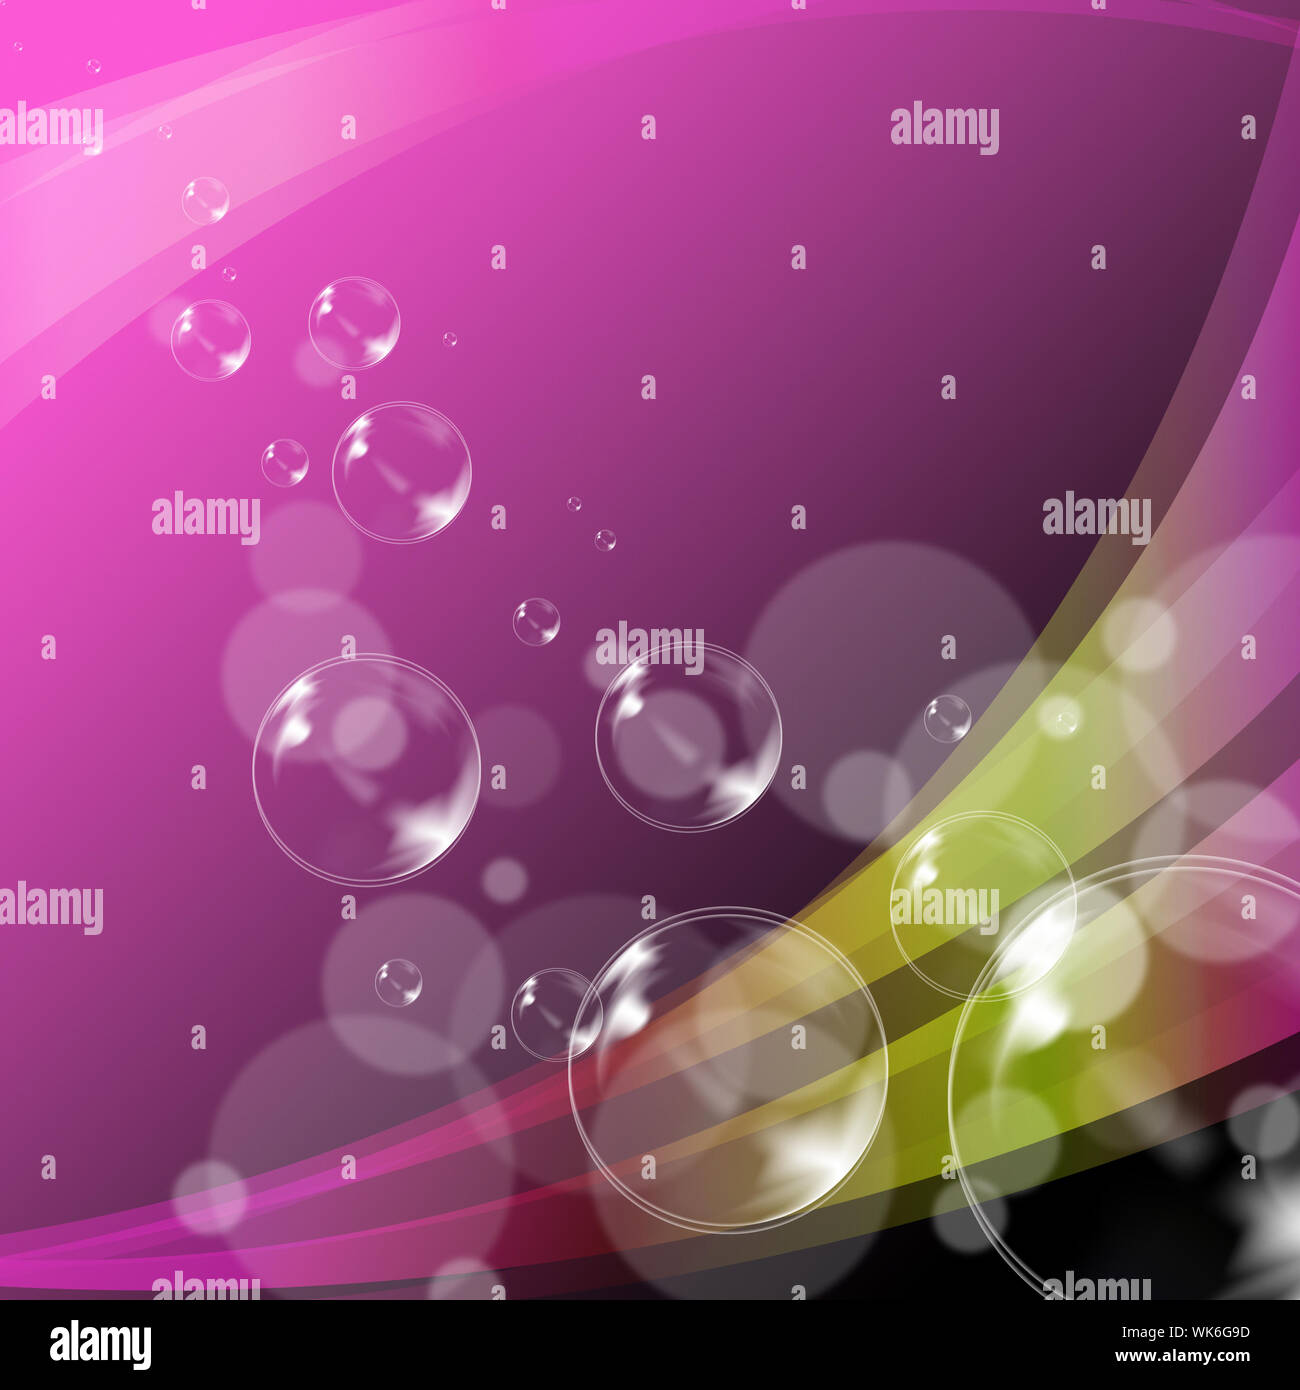 Bubbles Background Meaning Glimmering Joy Or Creative Bubble Stock Photo